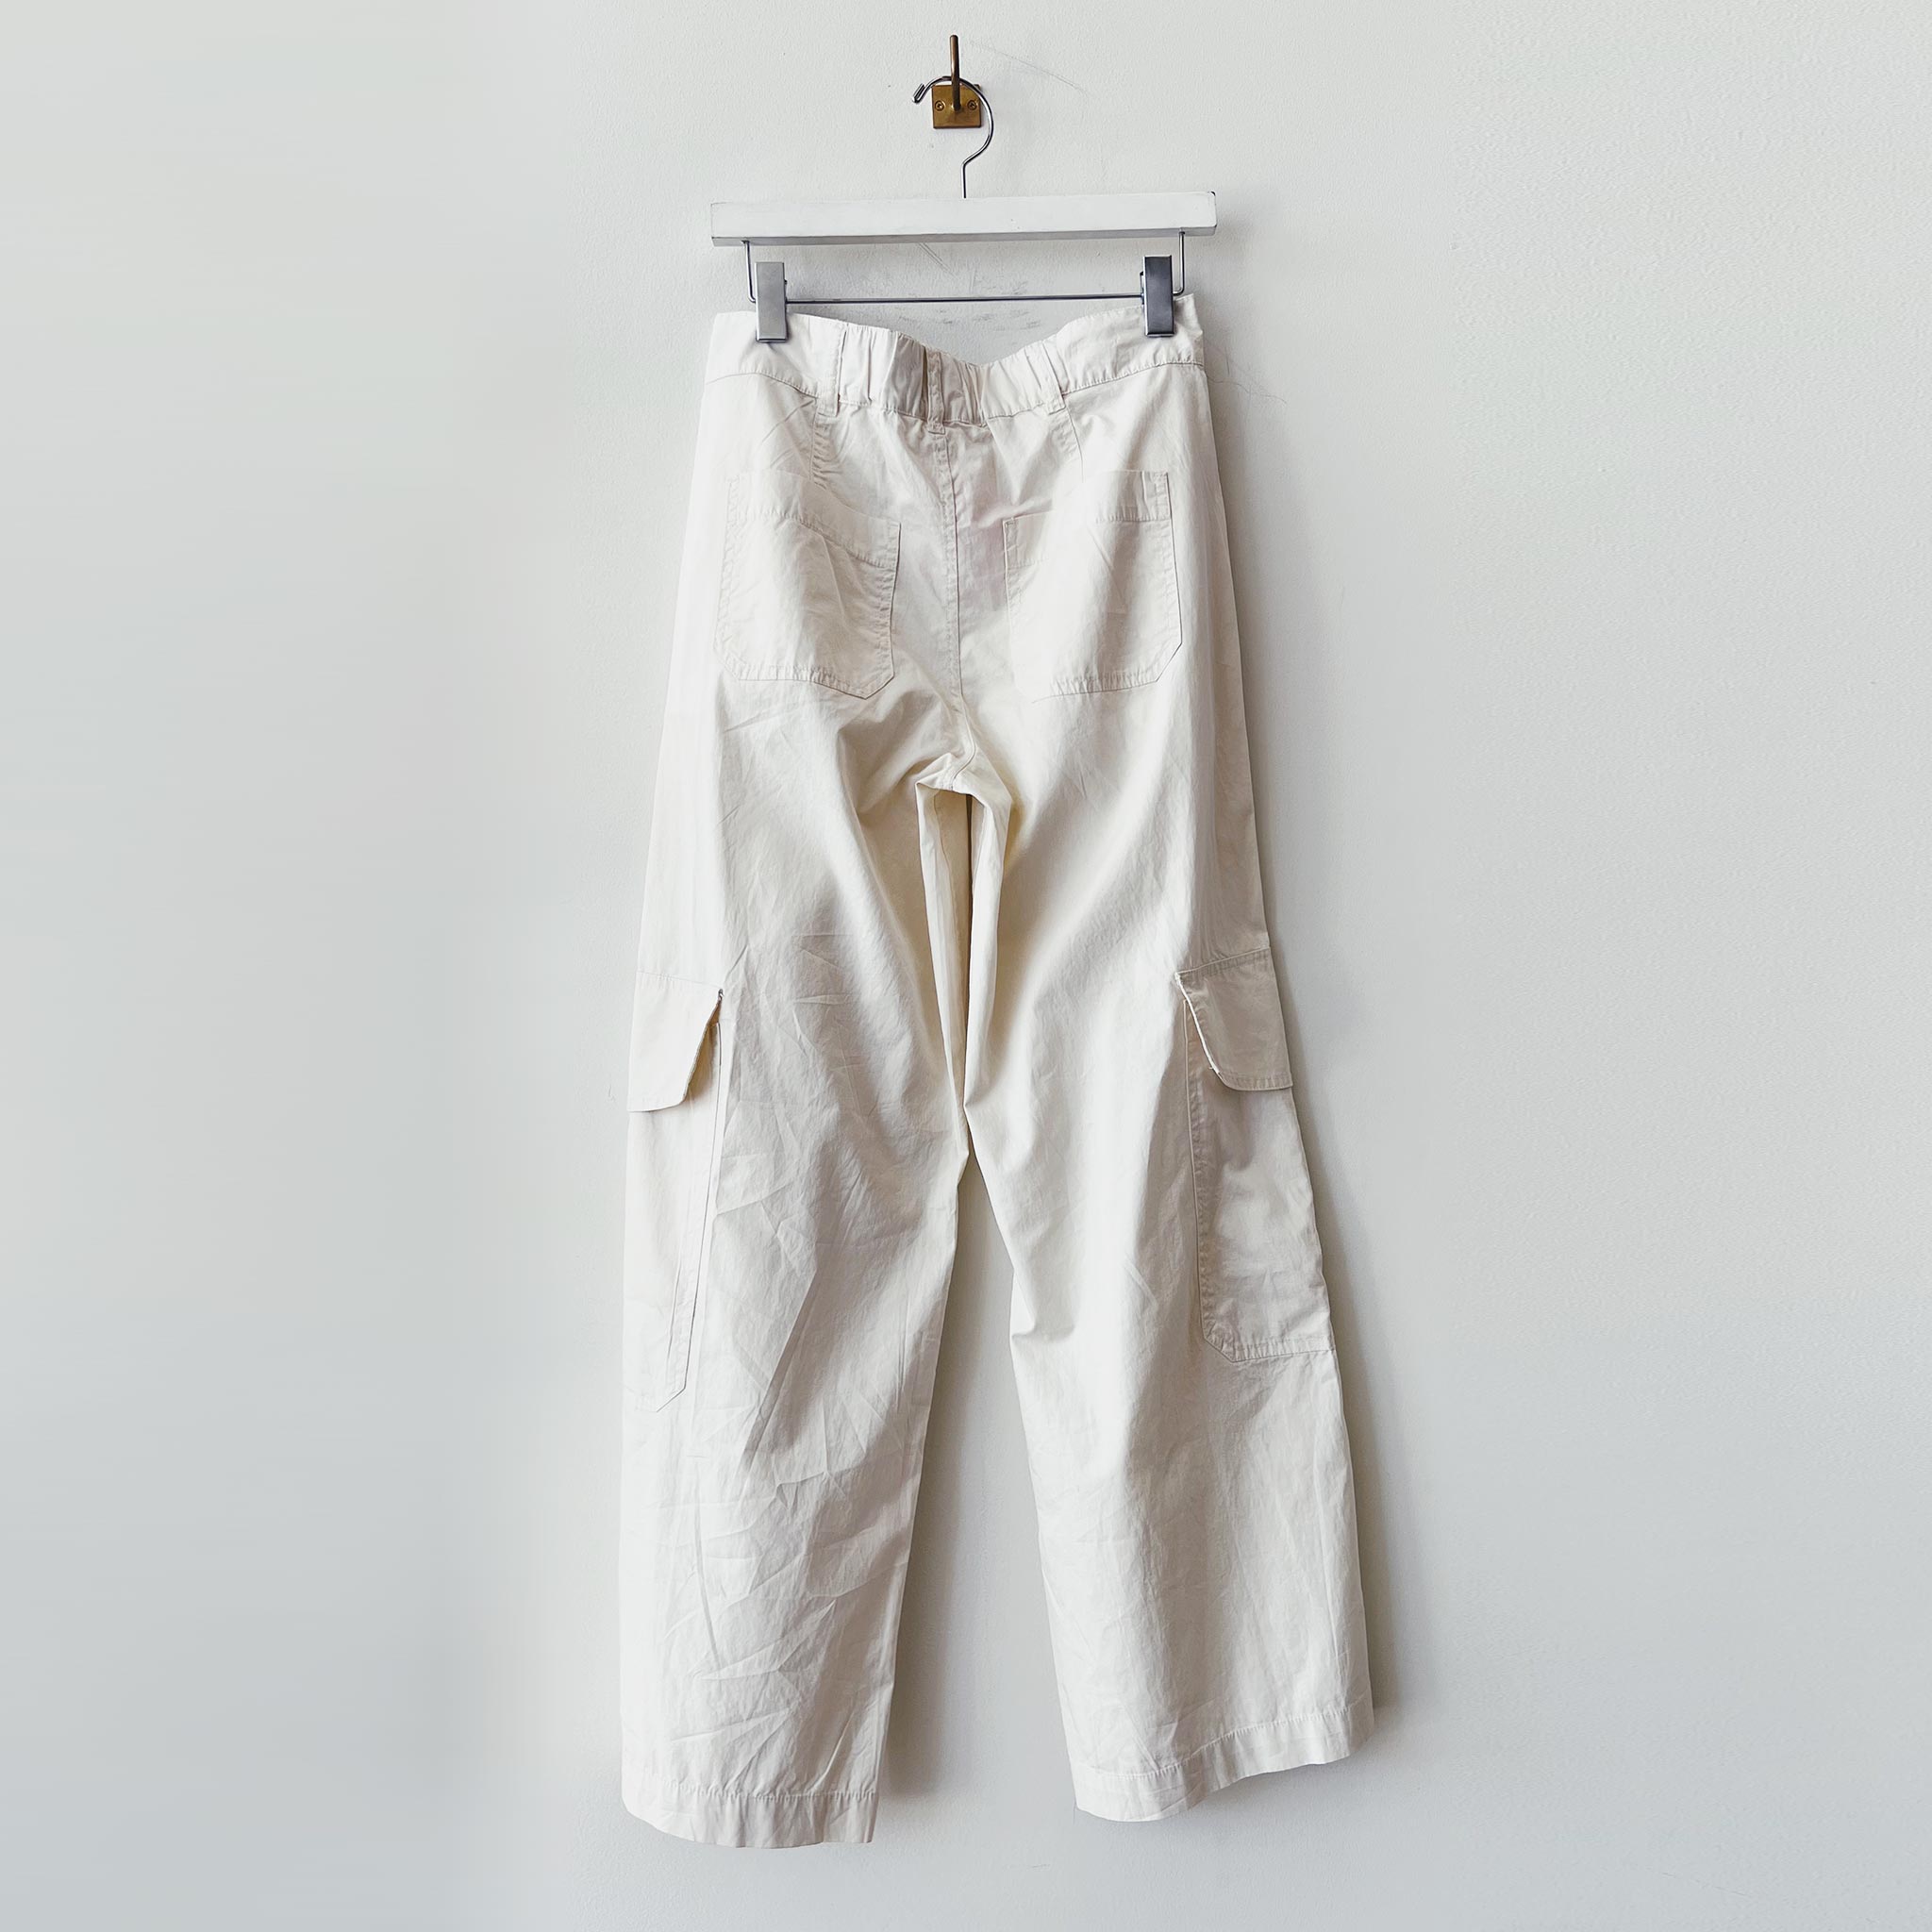 Back detail photo of the Wide Leg Cargo Pant - Cream.